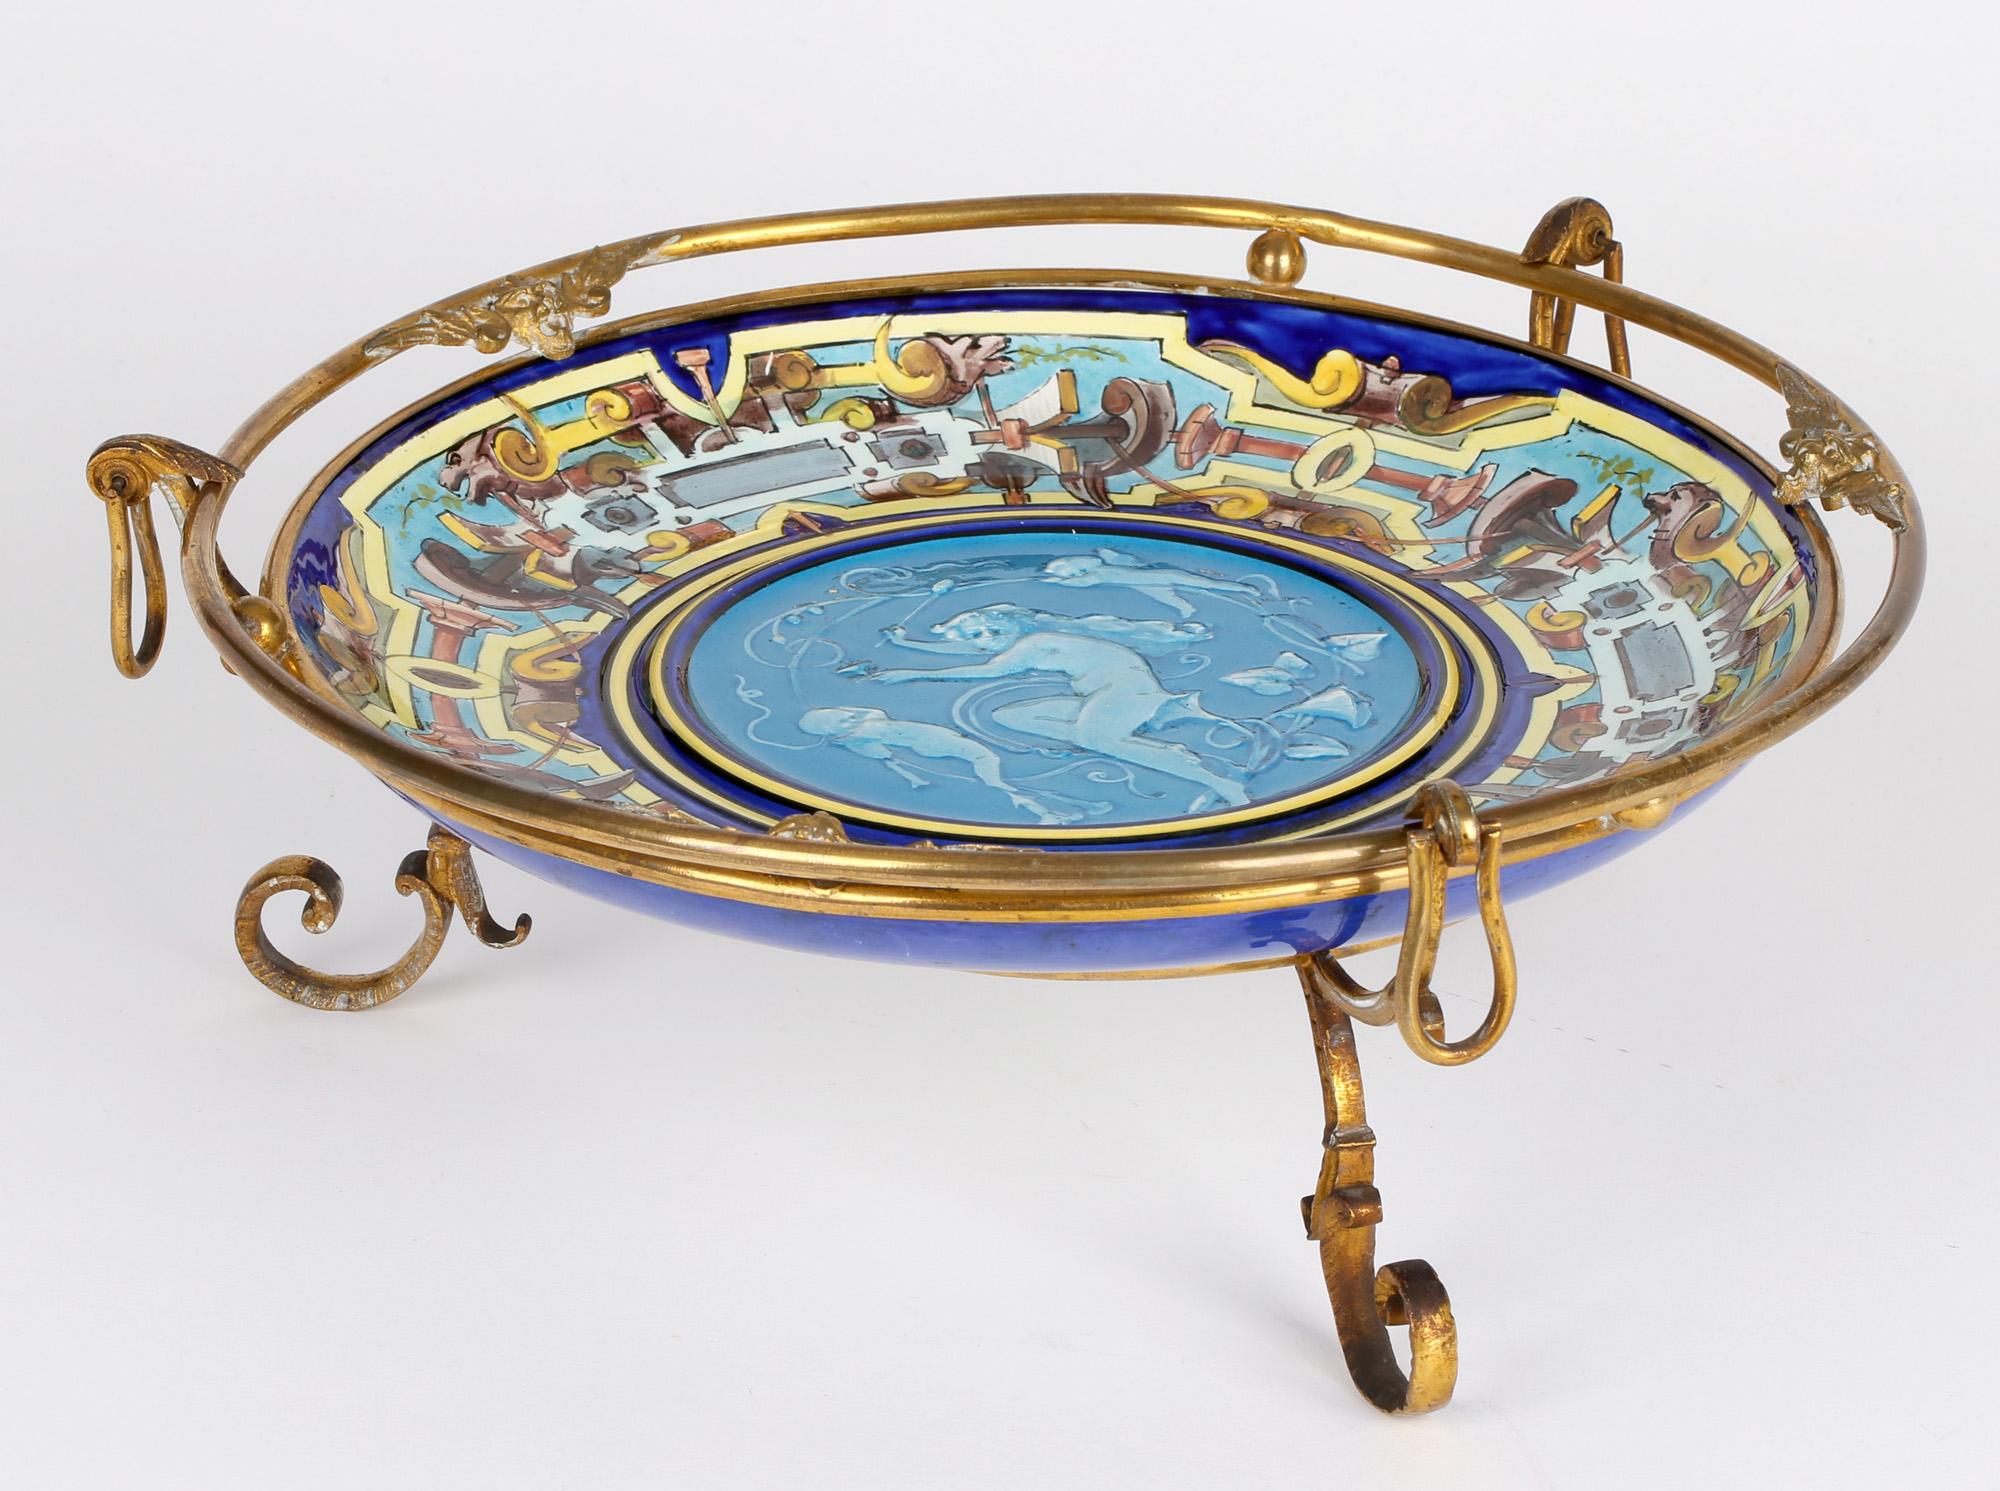 Aesthetic Movement Théodore Deck Attributed French Ormolu Mounted Majolica Tazza For Sale